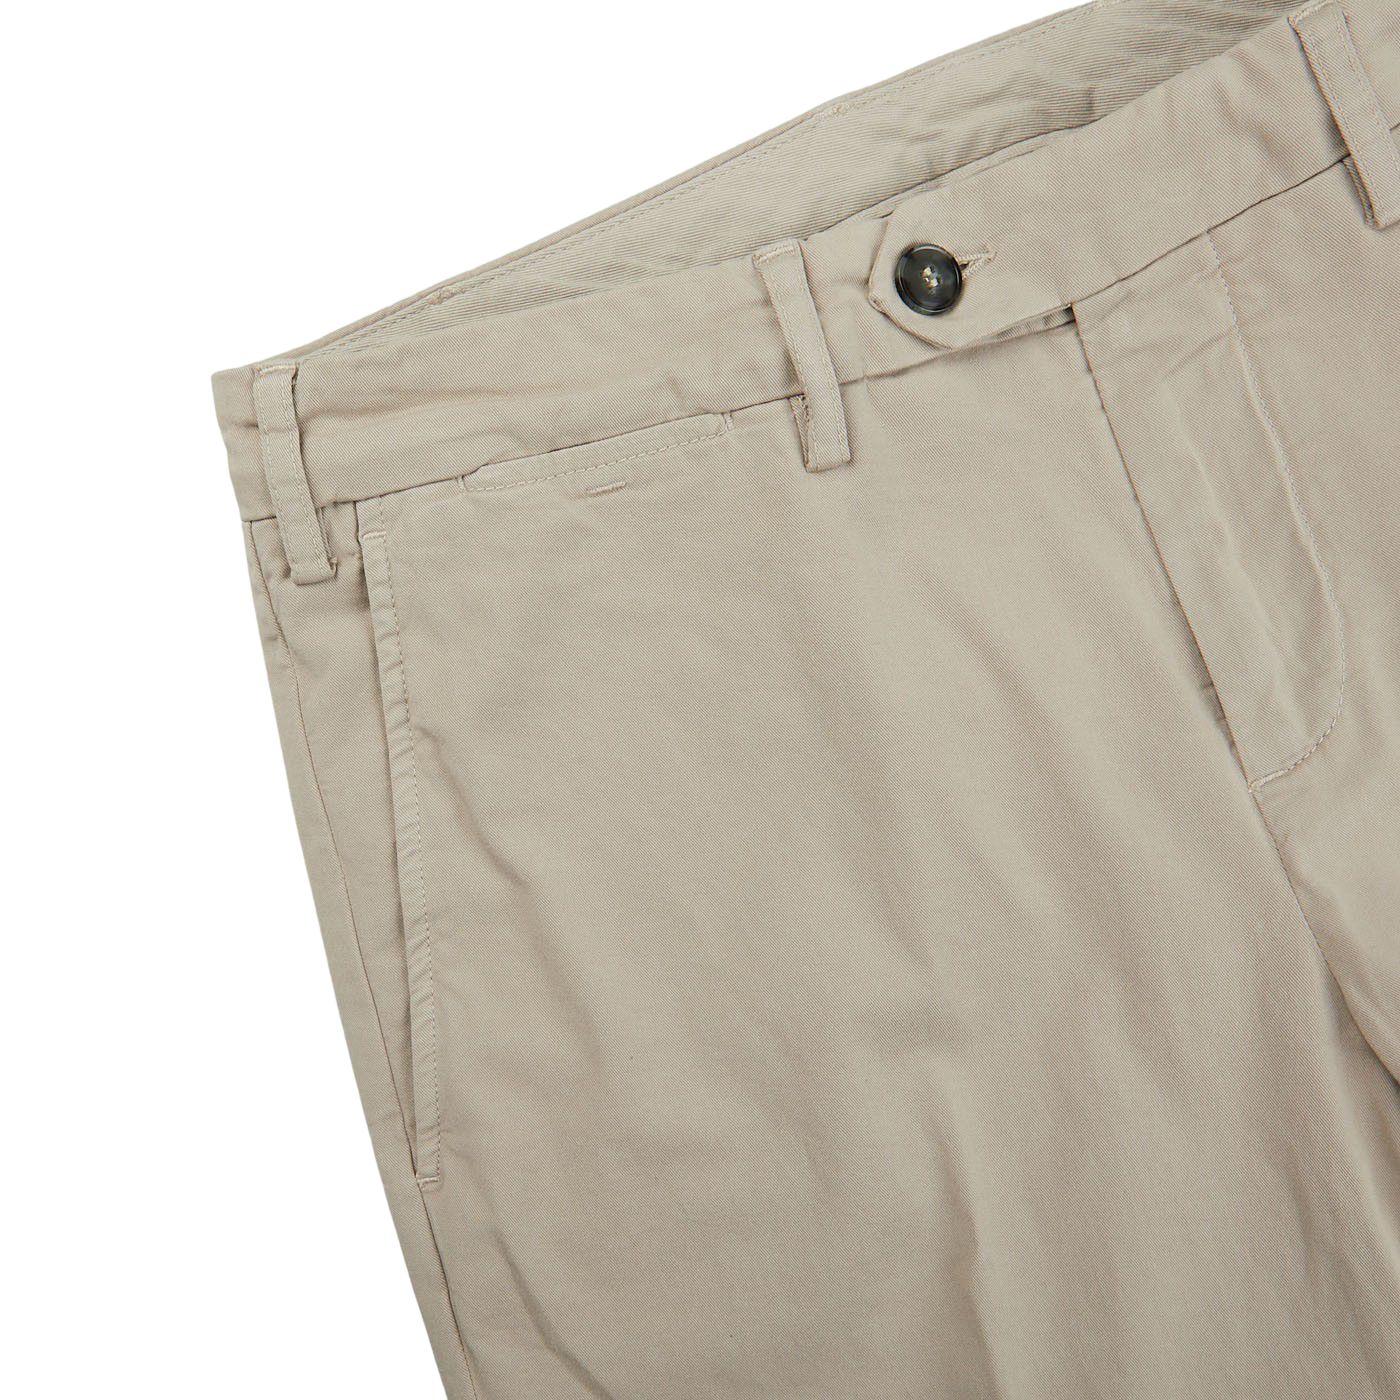 The Canali Stone Beige Cotton Stretch Flat Front Chinos with a distressed appearance.